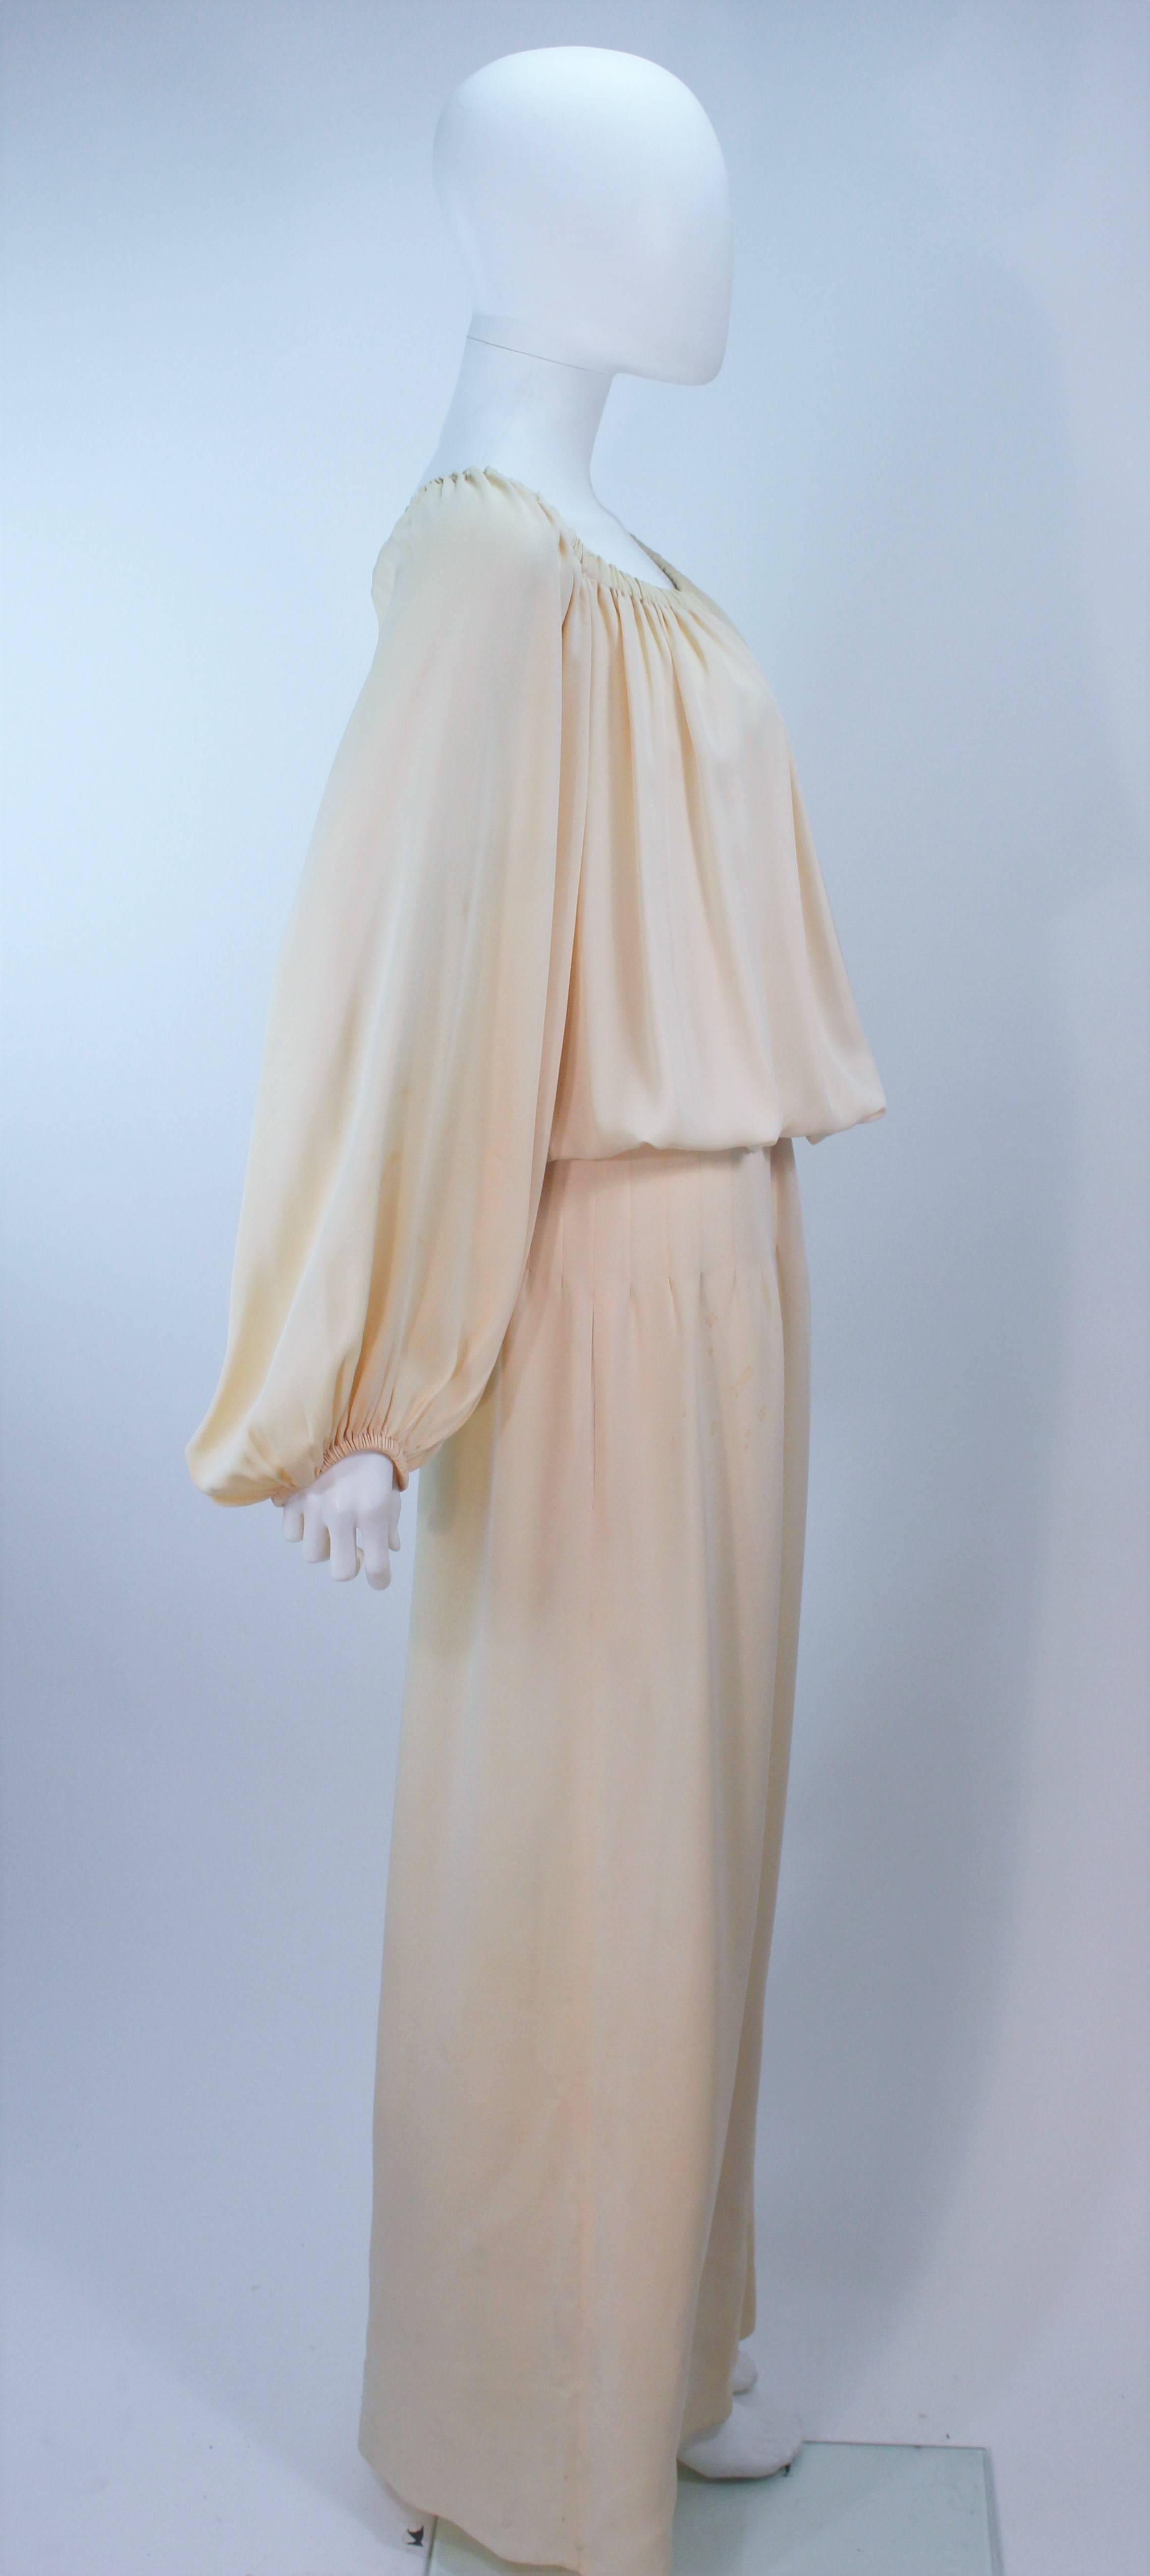 Gray CHRISTIAN DIOR COUTURE Provenance Betsy Bloomingdale Nude Silk Chiffon Gown  For Sale